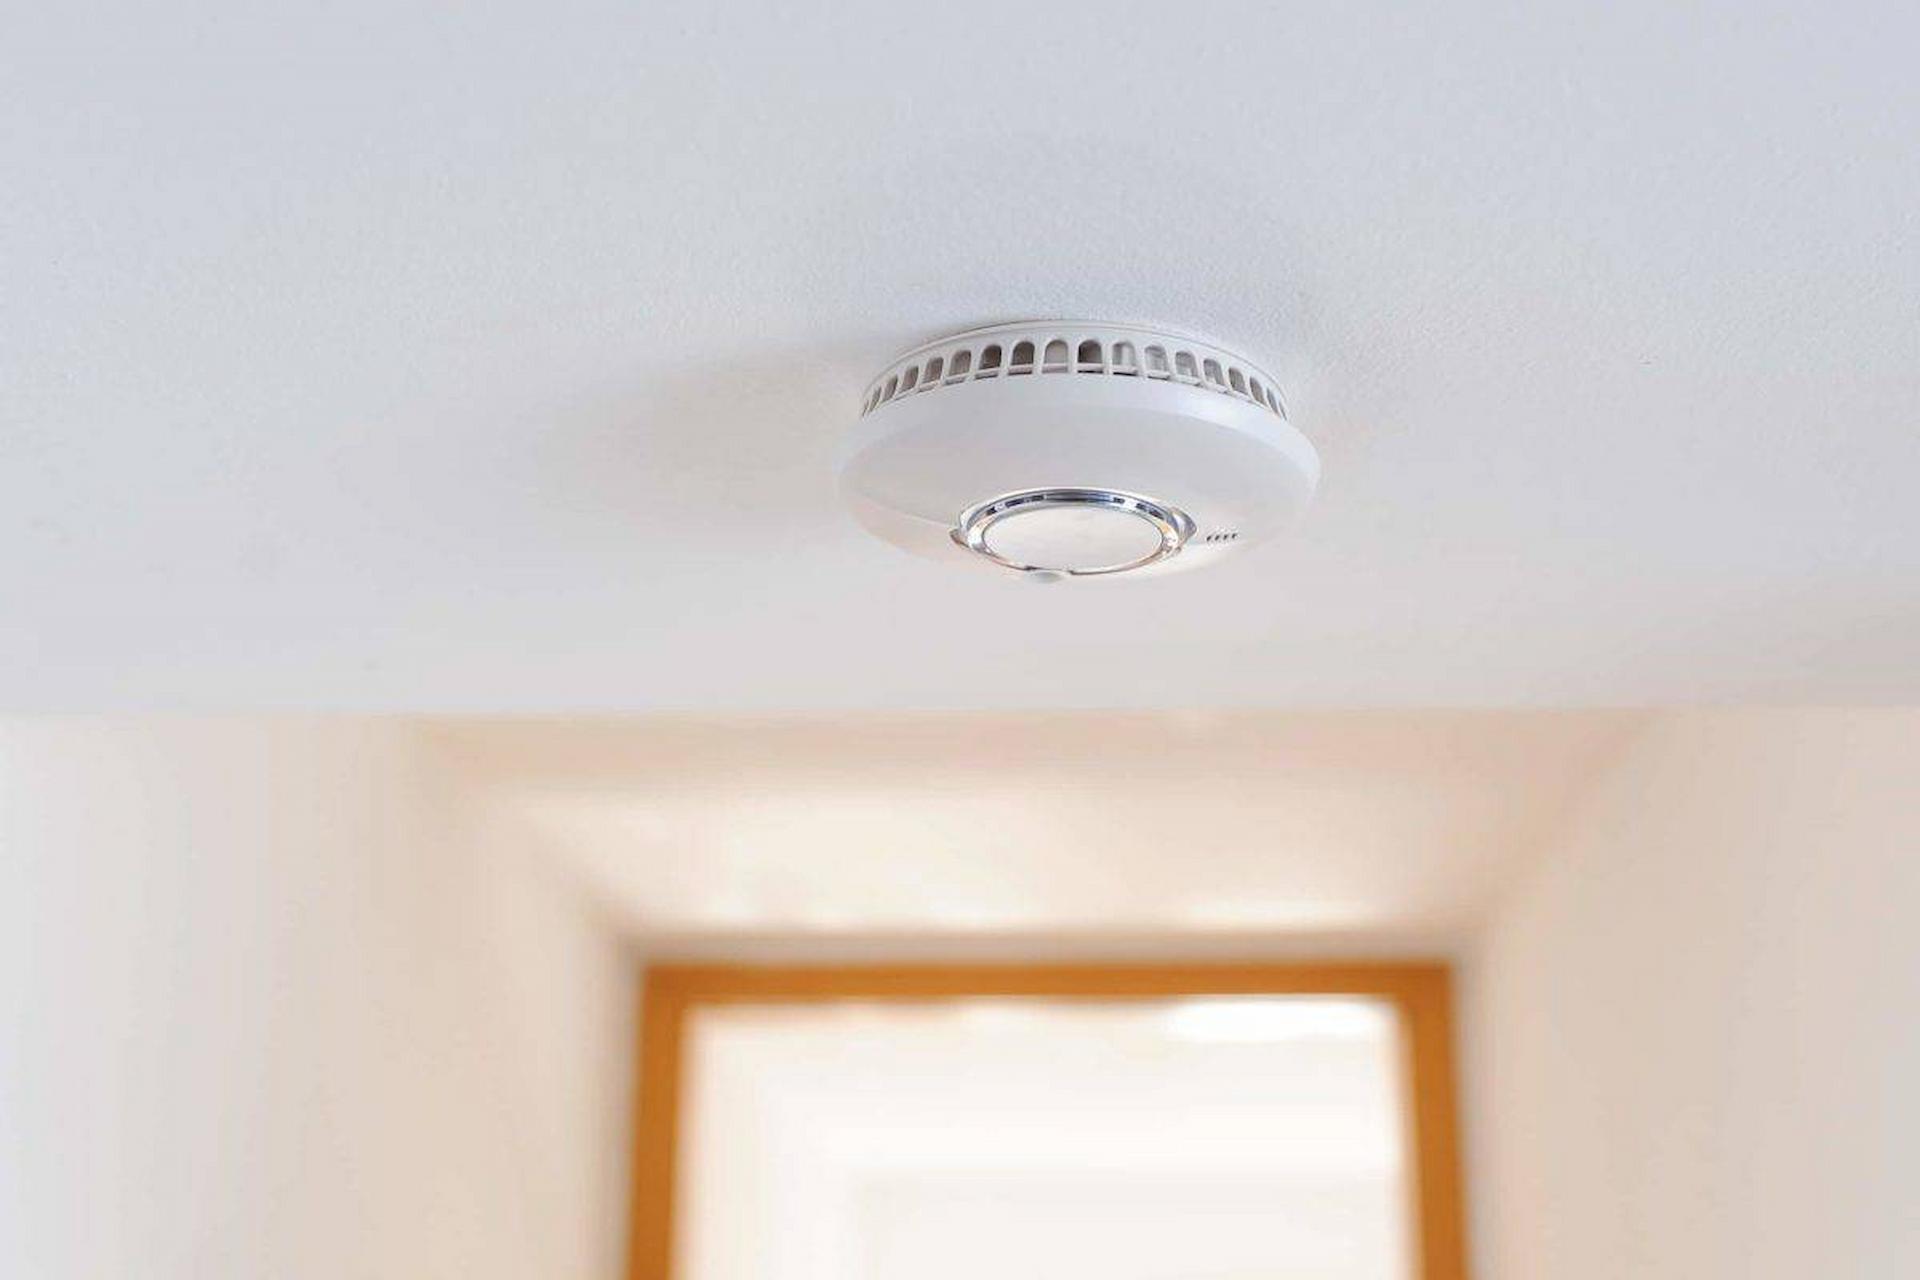 Where Would You Get Fire Alarms Installed In London?